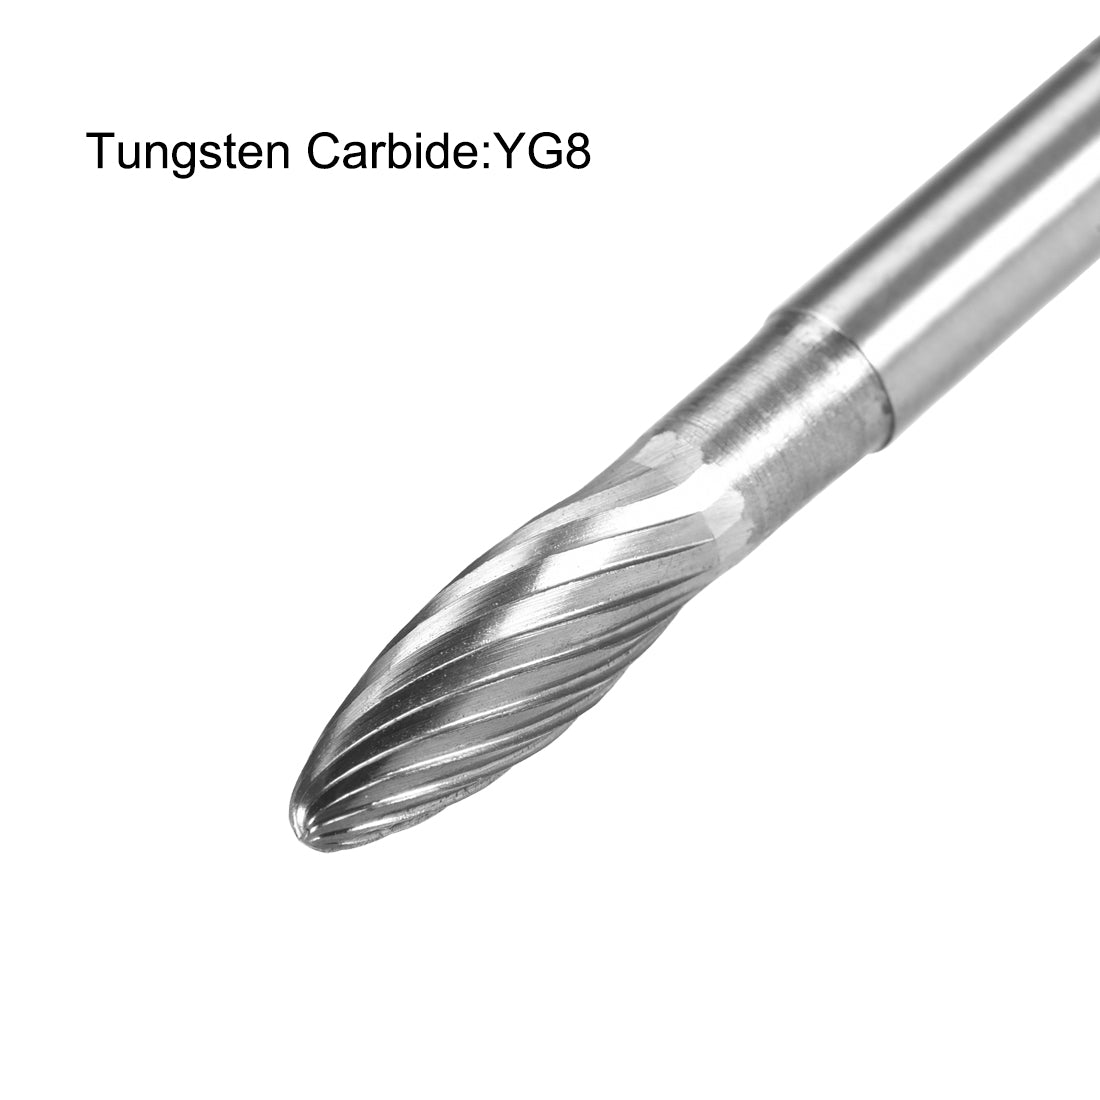 uxcell Uxcell Tungsten Carbide YG8 Single Cut Rotary Burrs File 6mmOval Shape with 1/4" Shank